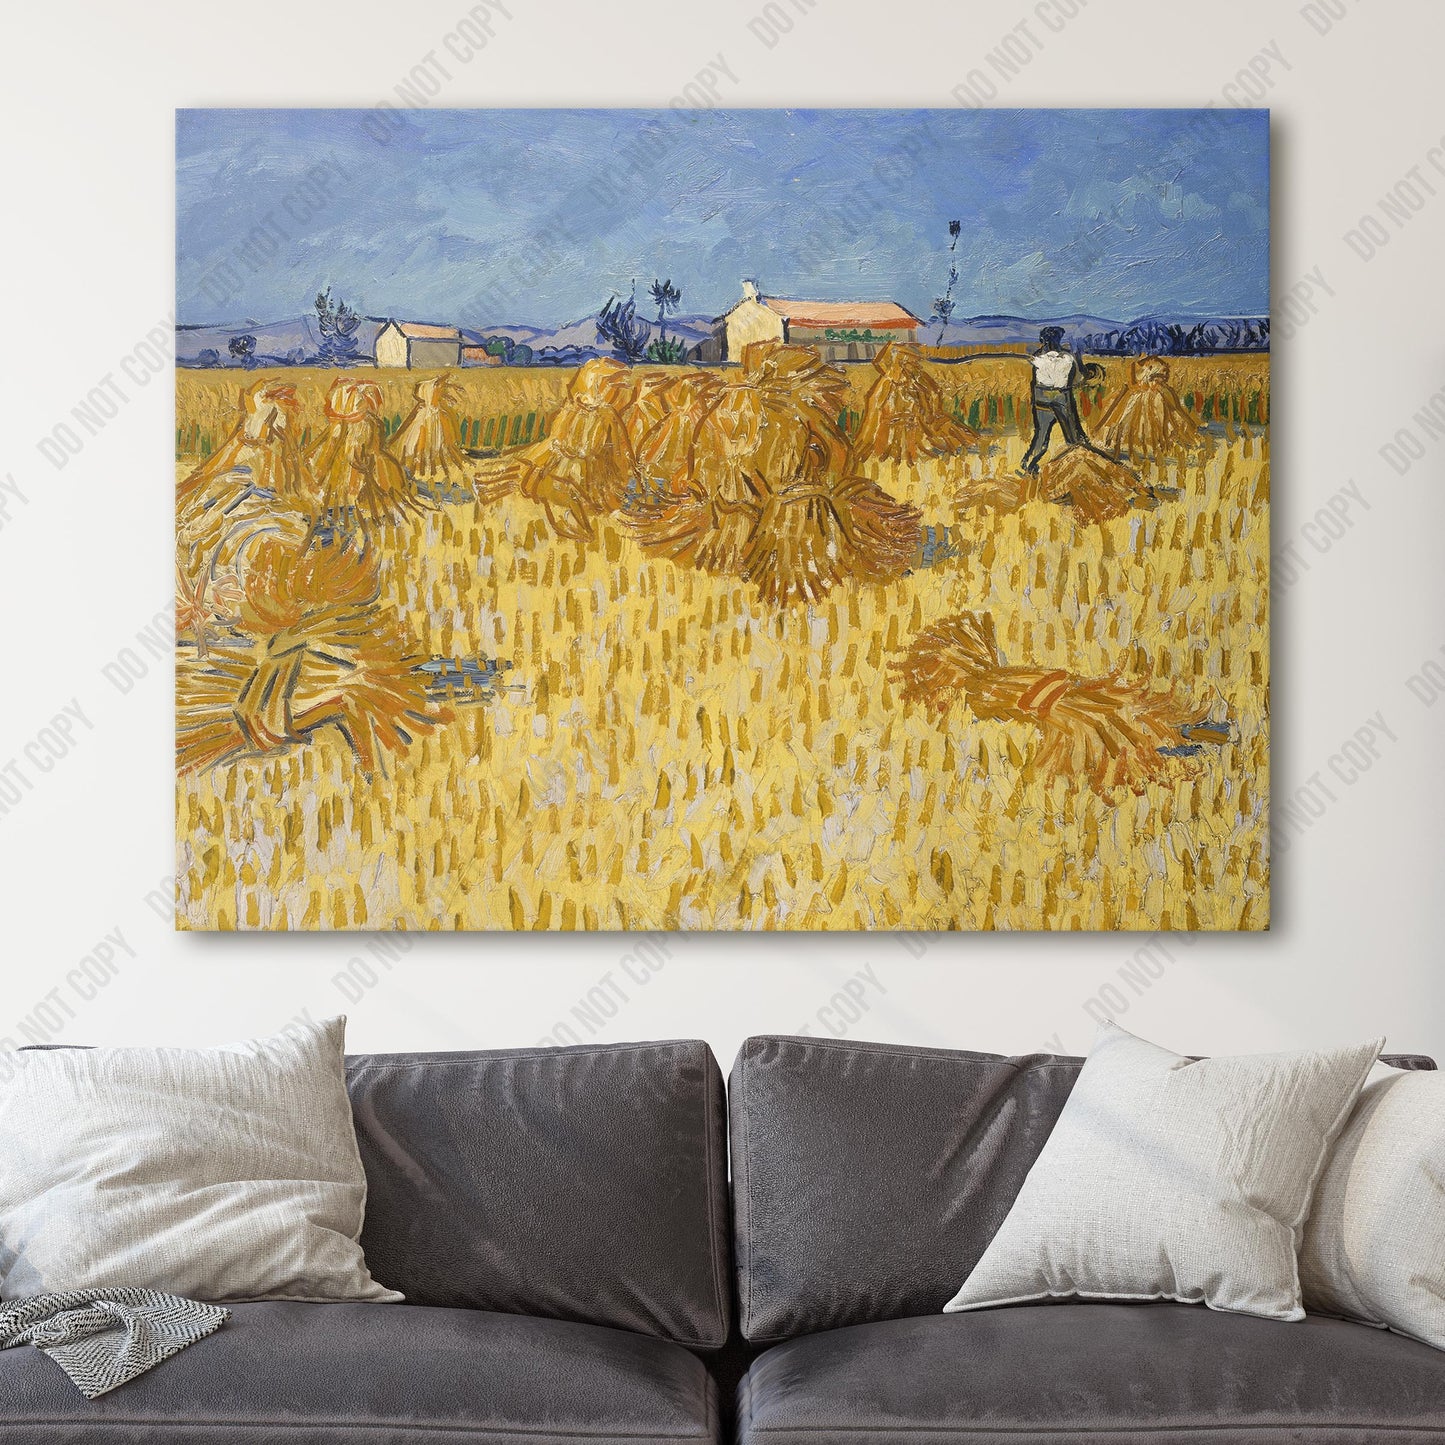 Harvest in Provence (1888) by Van Gogh